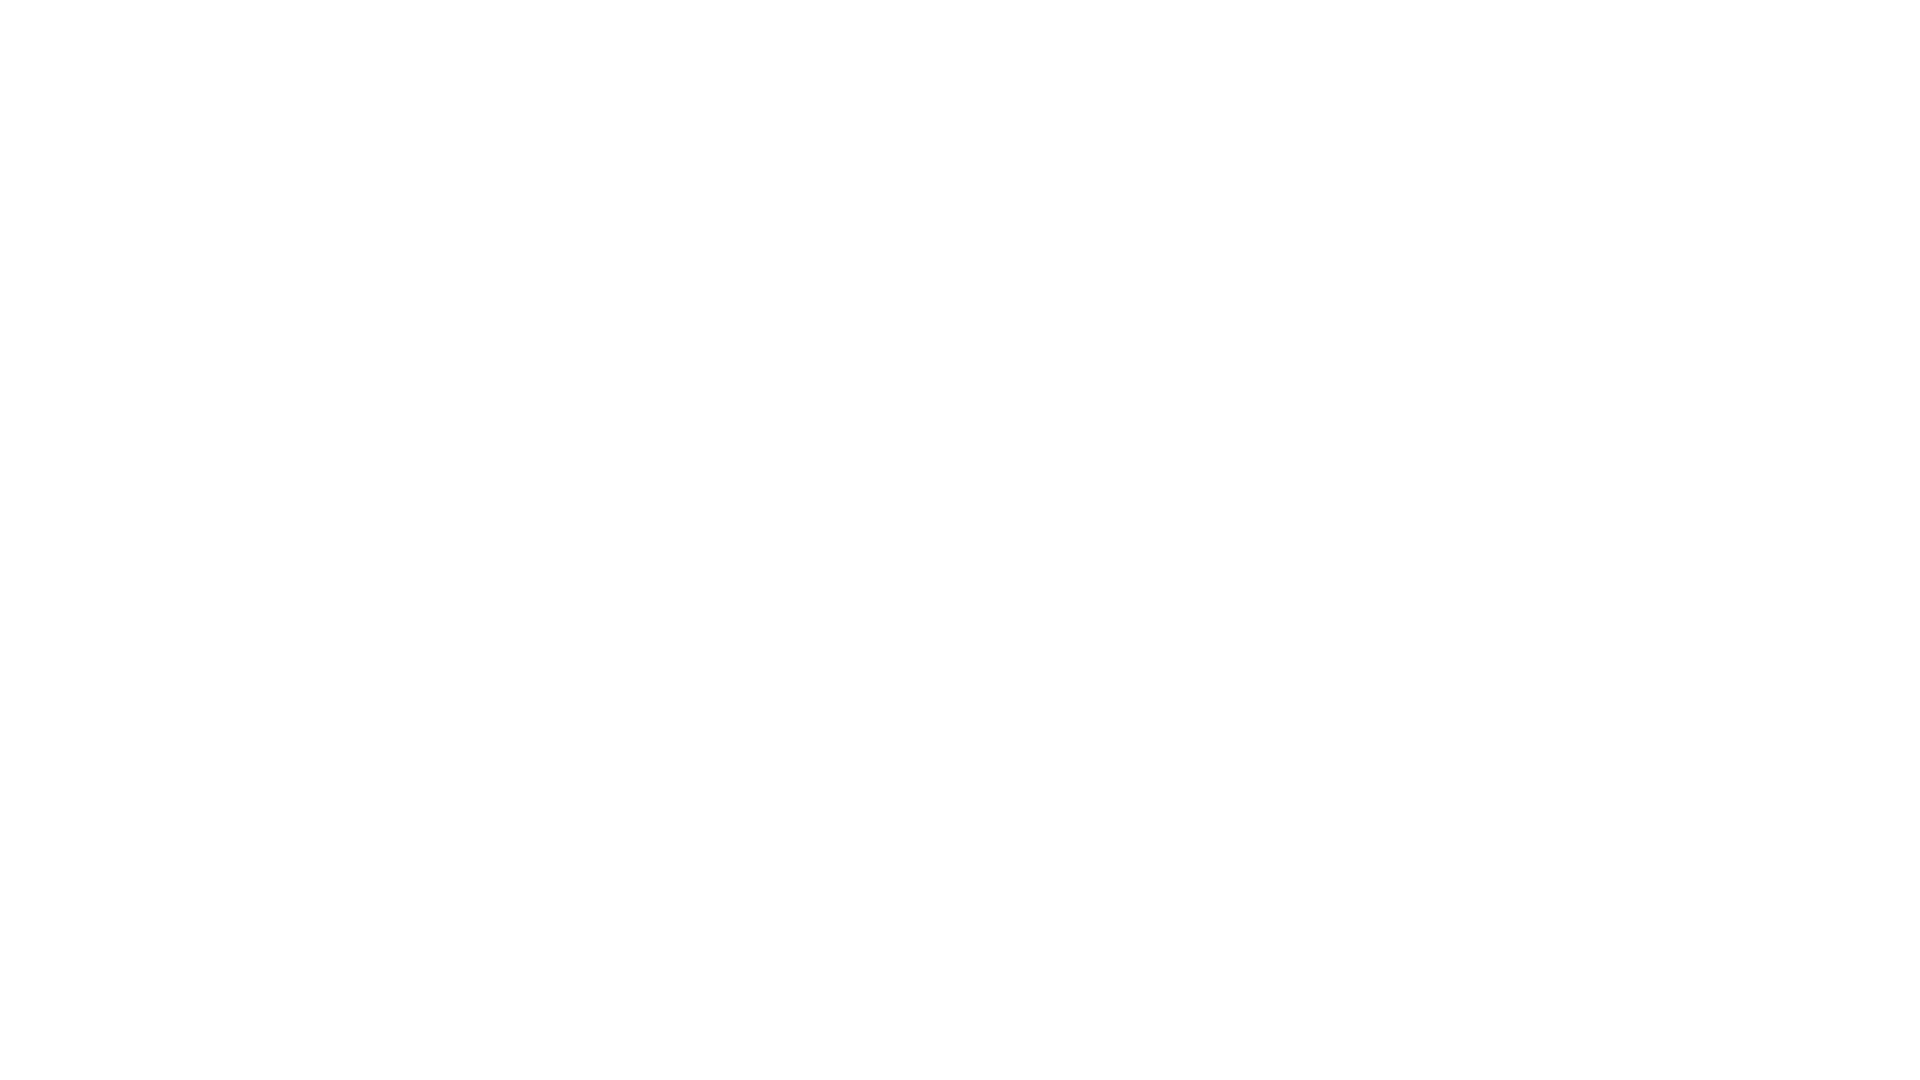 OCEAN SEEN FROM THE HEART_title_white